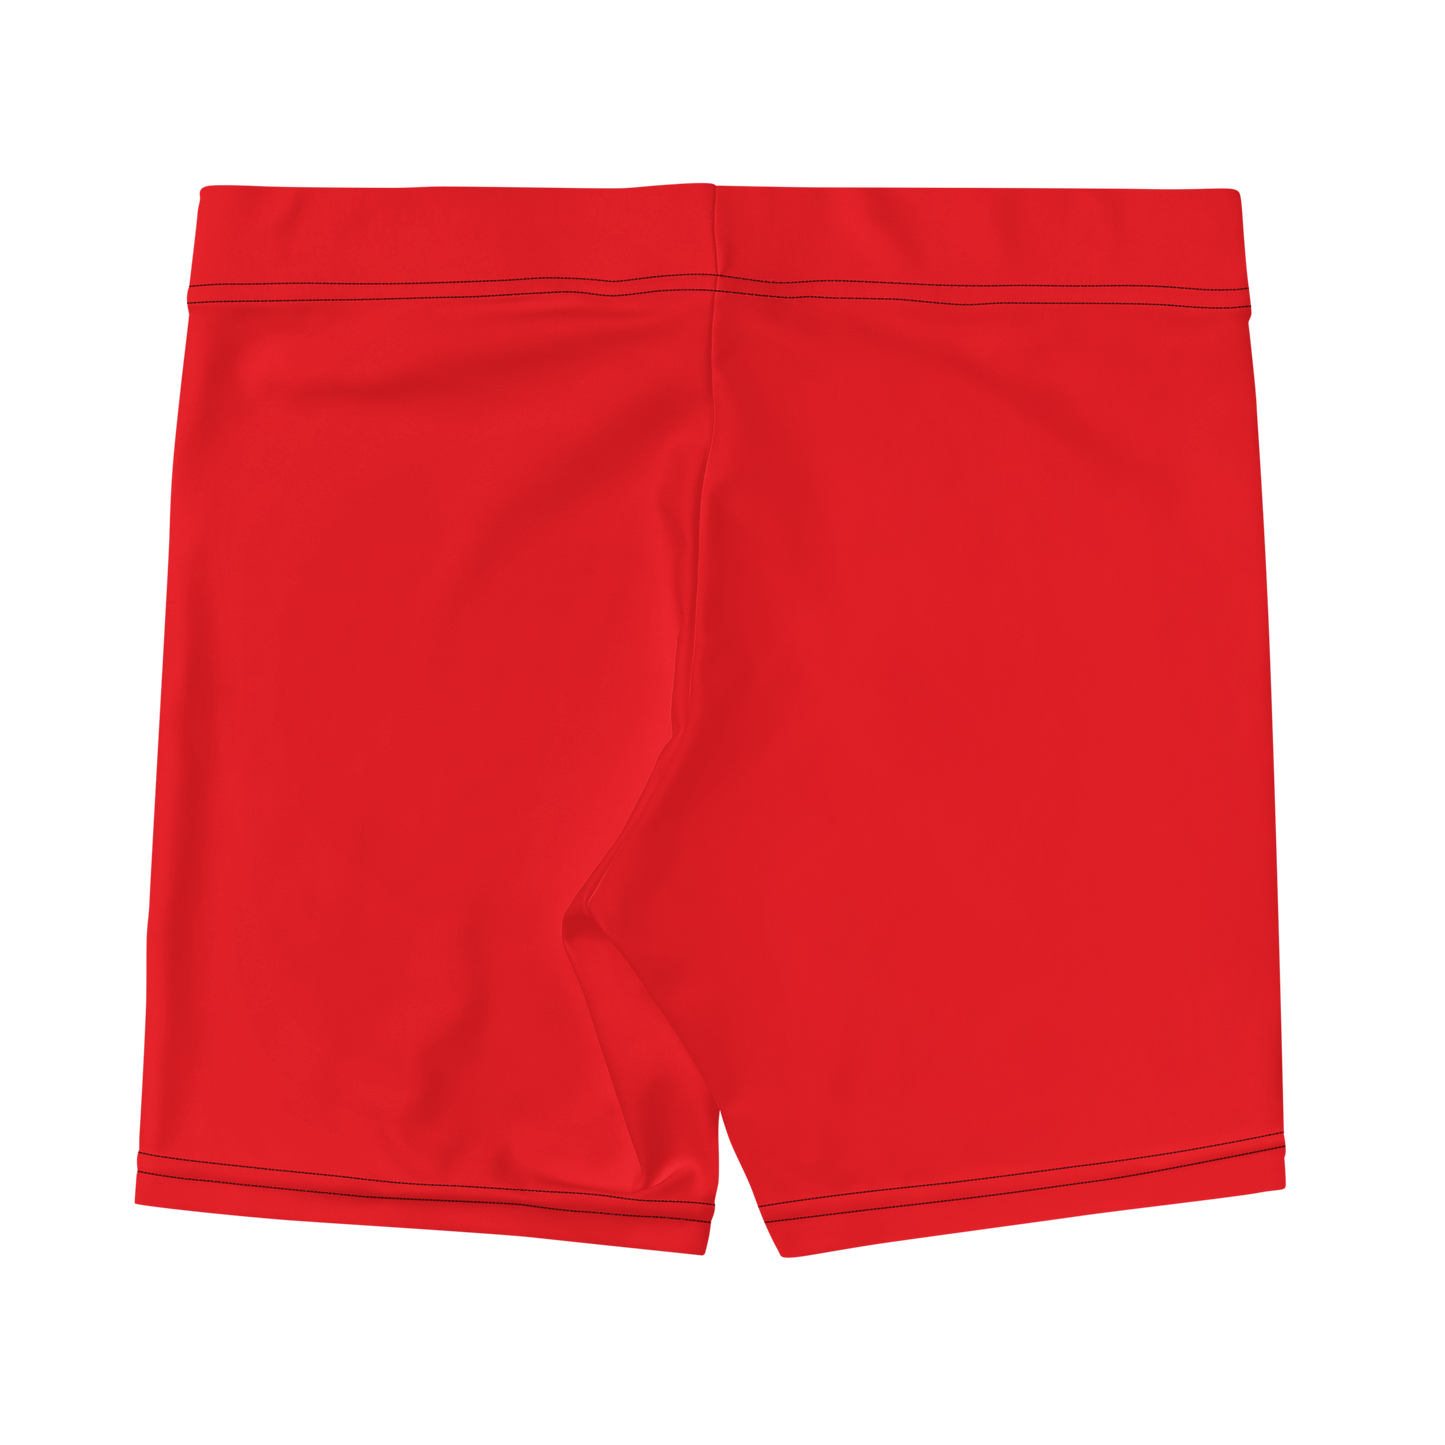 Shorts- Red Fat Booty Contract